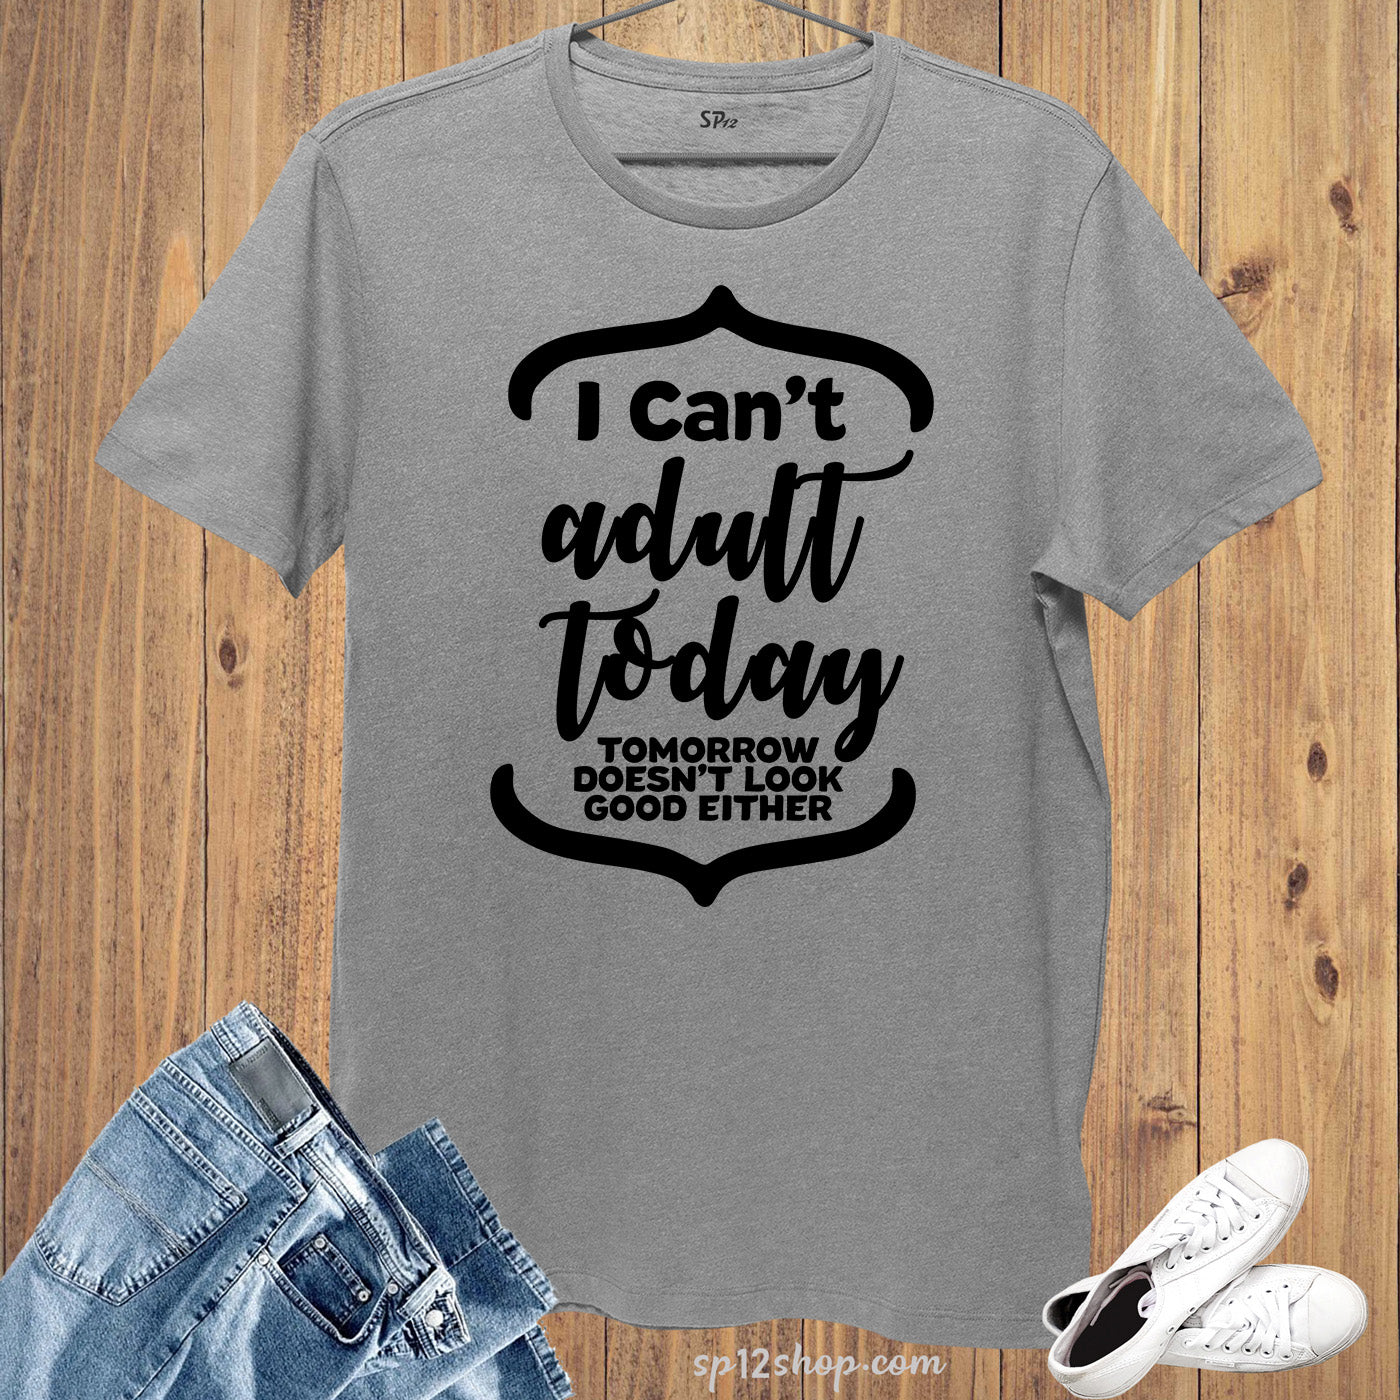 I Can't Adult Today Tomorrow Doesn't Look Good Either T Shirt